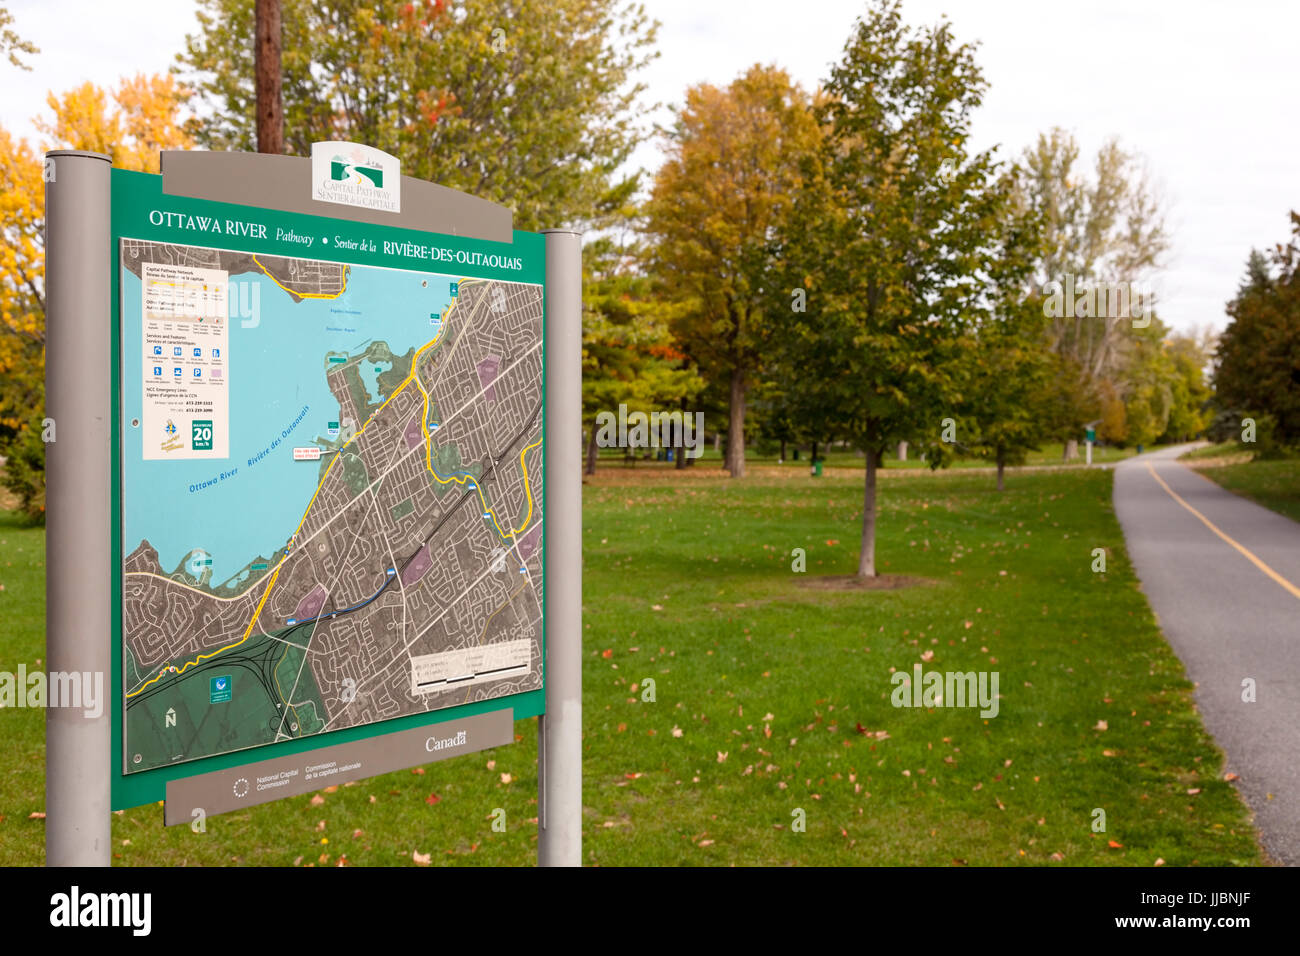 A sign and map for the Ottawa River Pathway or Capital Pathway which is also part of the Trans Canada Trail at Brittania Park in Ottawa, Ontario. Stock Photo